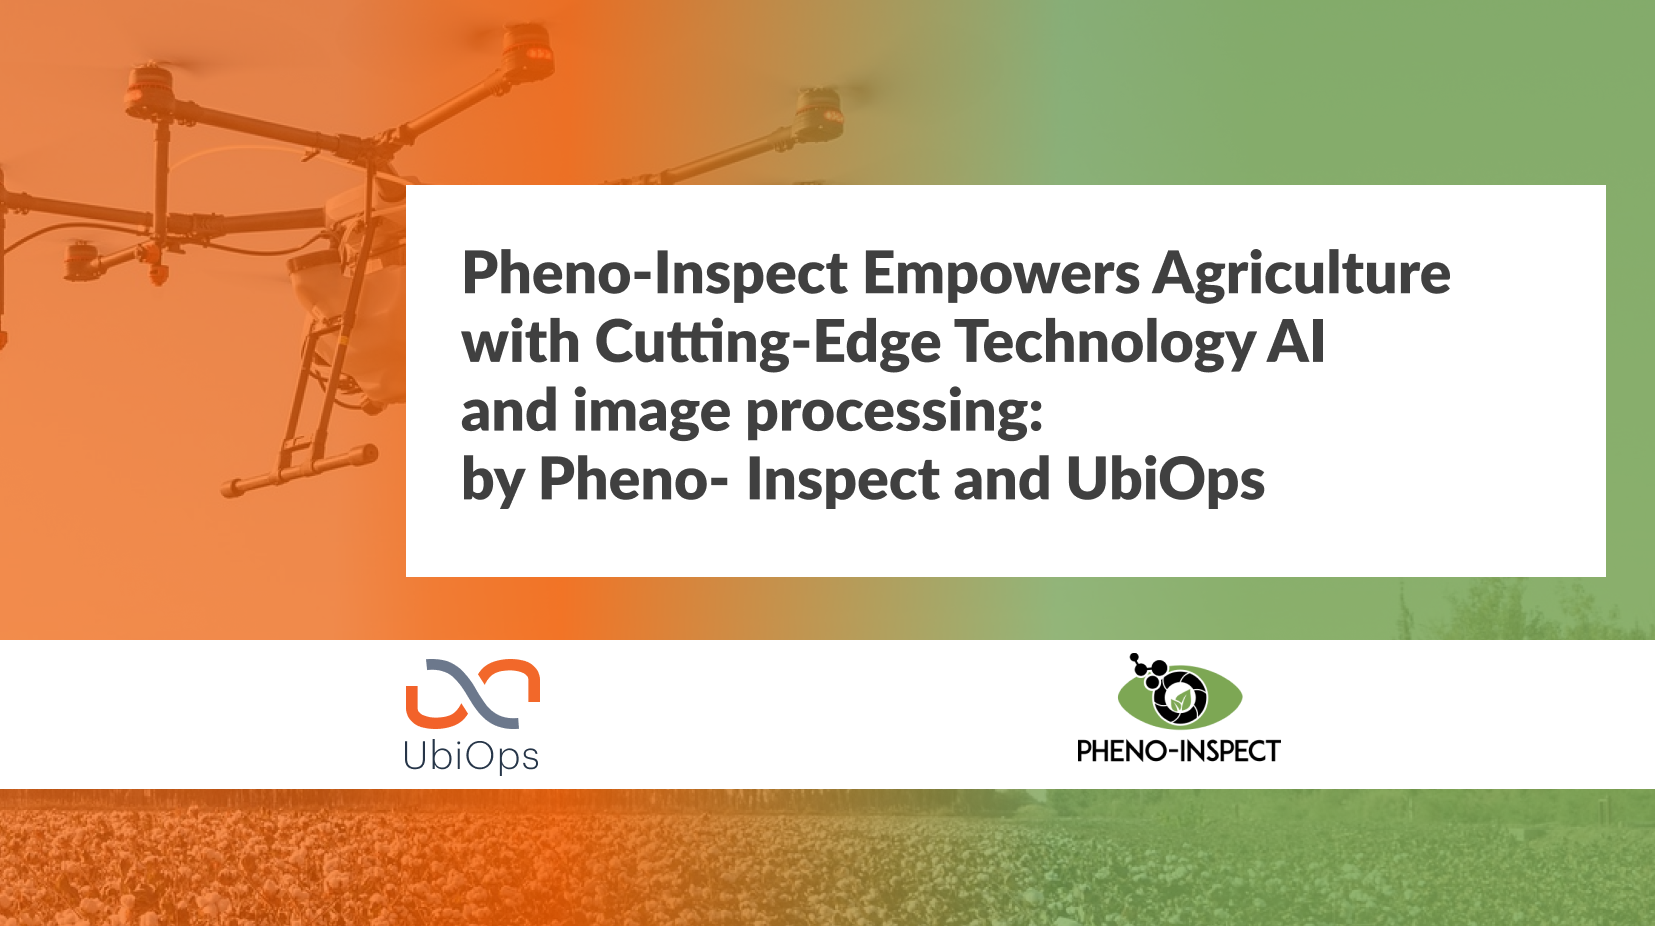 Pheno-Inspect Empowers Agriculture with Cutting-Edge Technology AI and image processing_ by Pheno- Inspect and UbiOps (1)